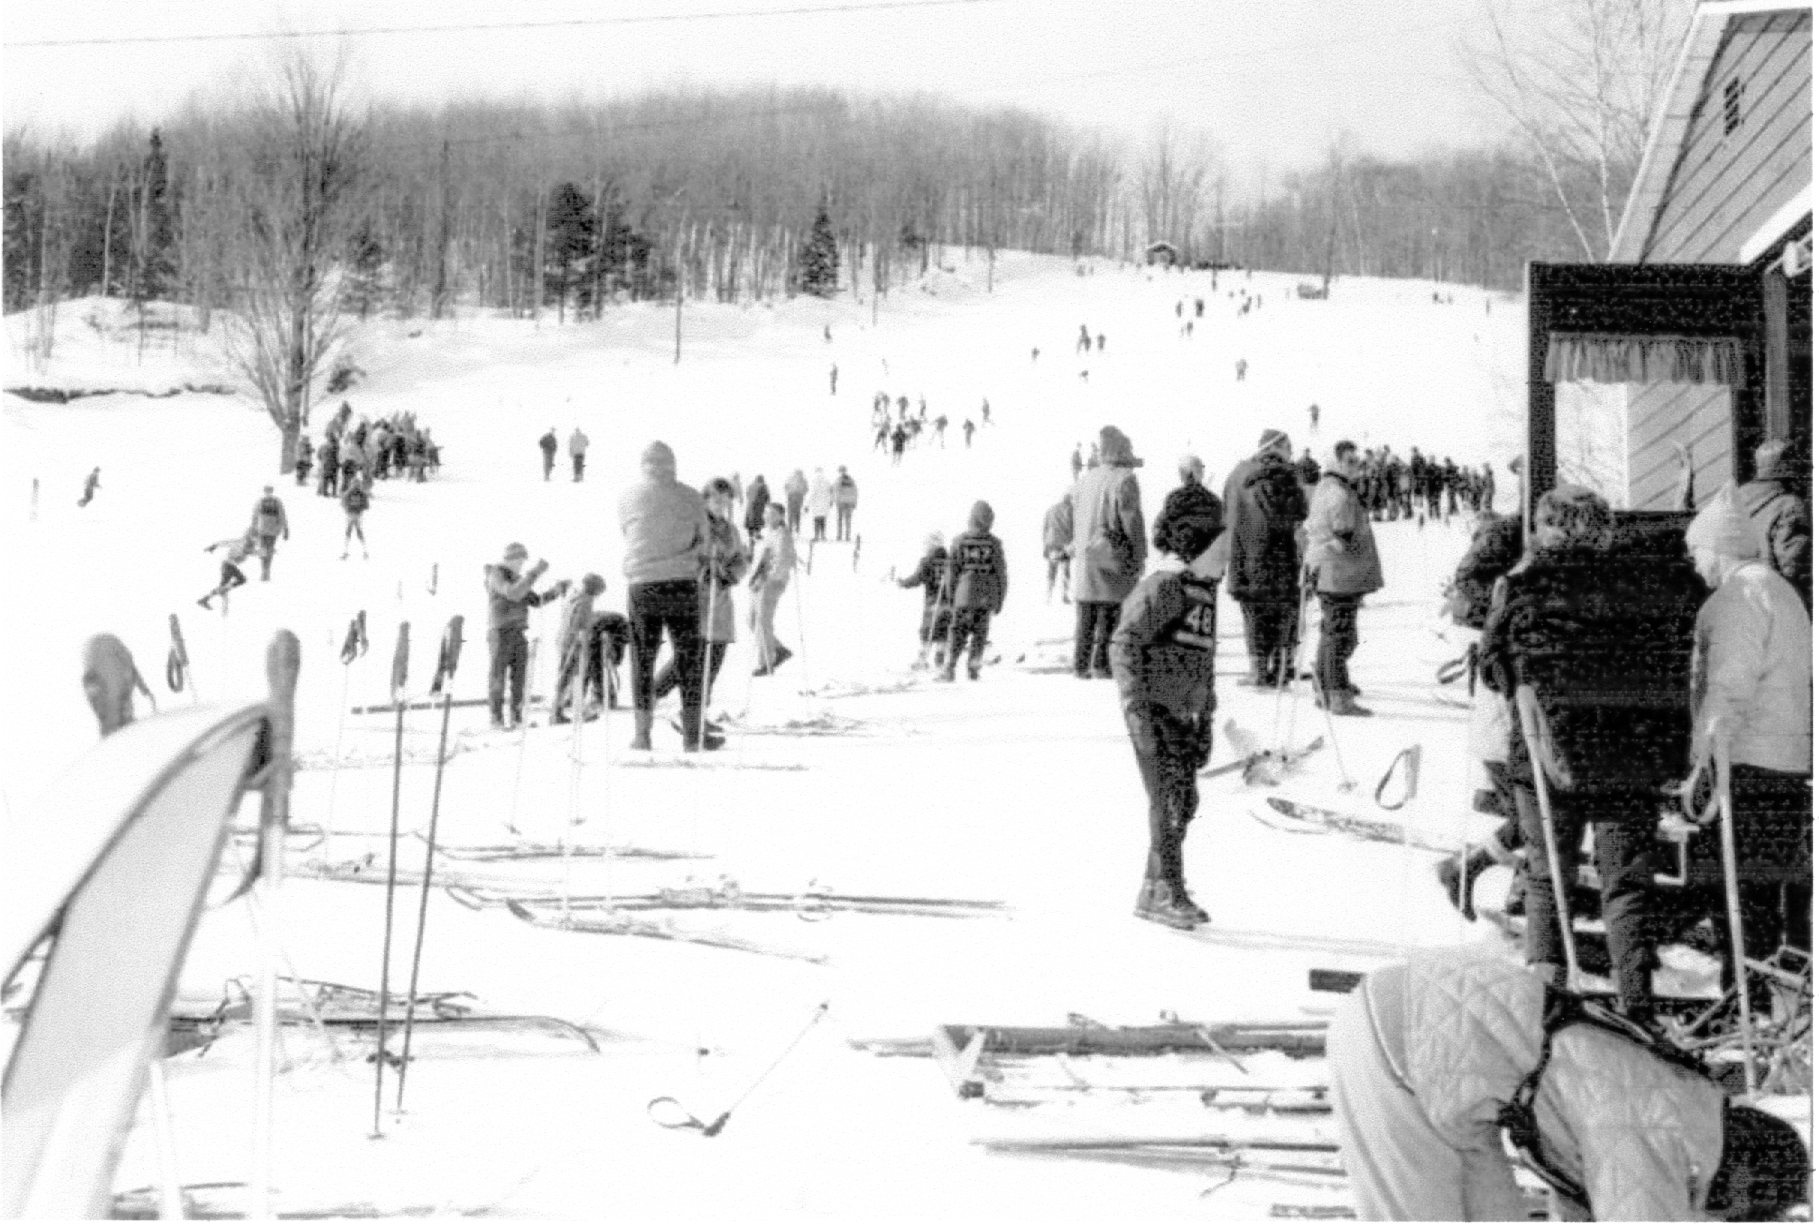 Mt. Eustis first opened in 1939, and organizers hope its rebirth will come in the winter of 2015.